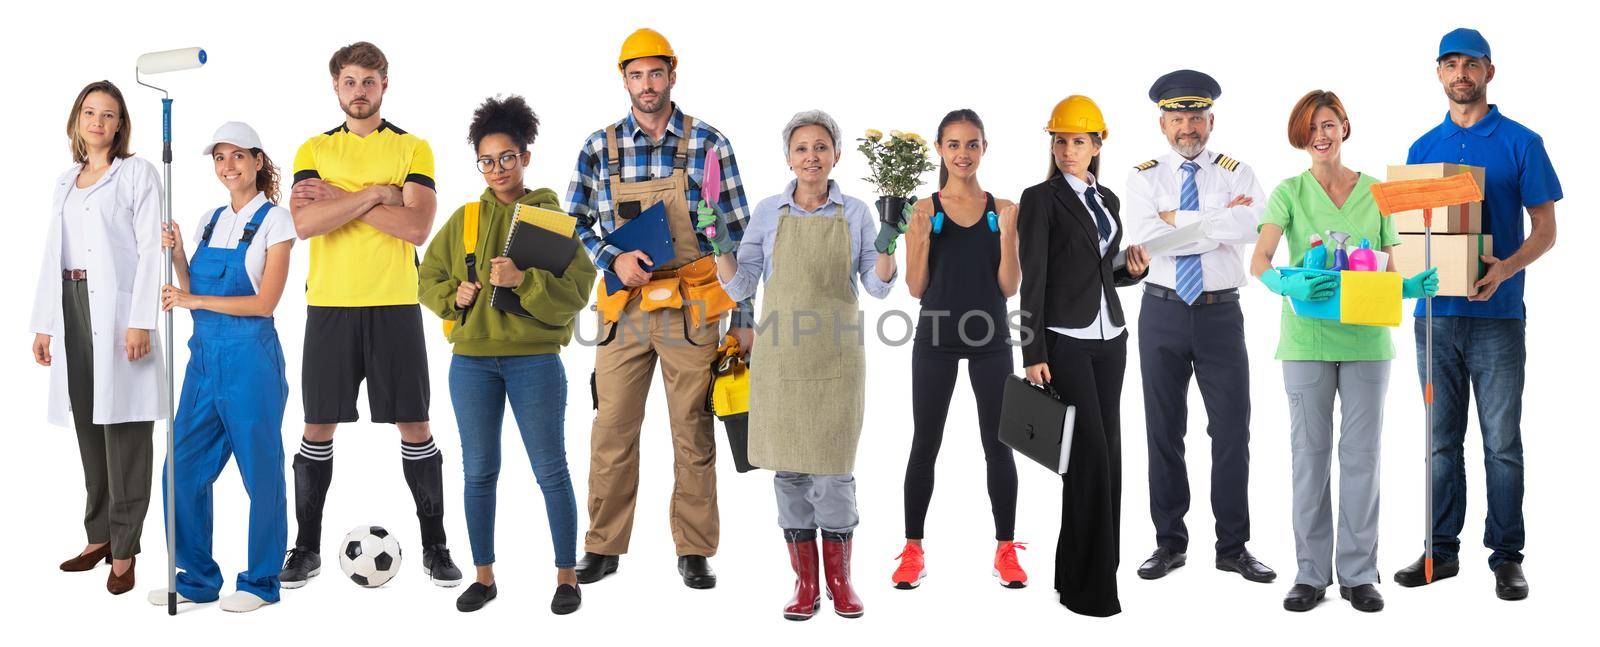 Diverse professions people isolated on white background